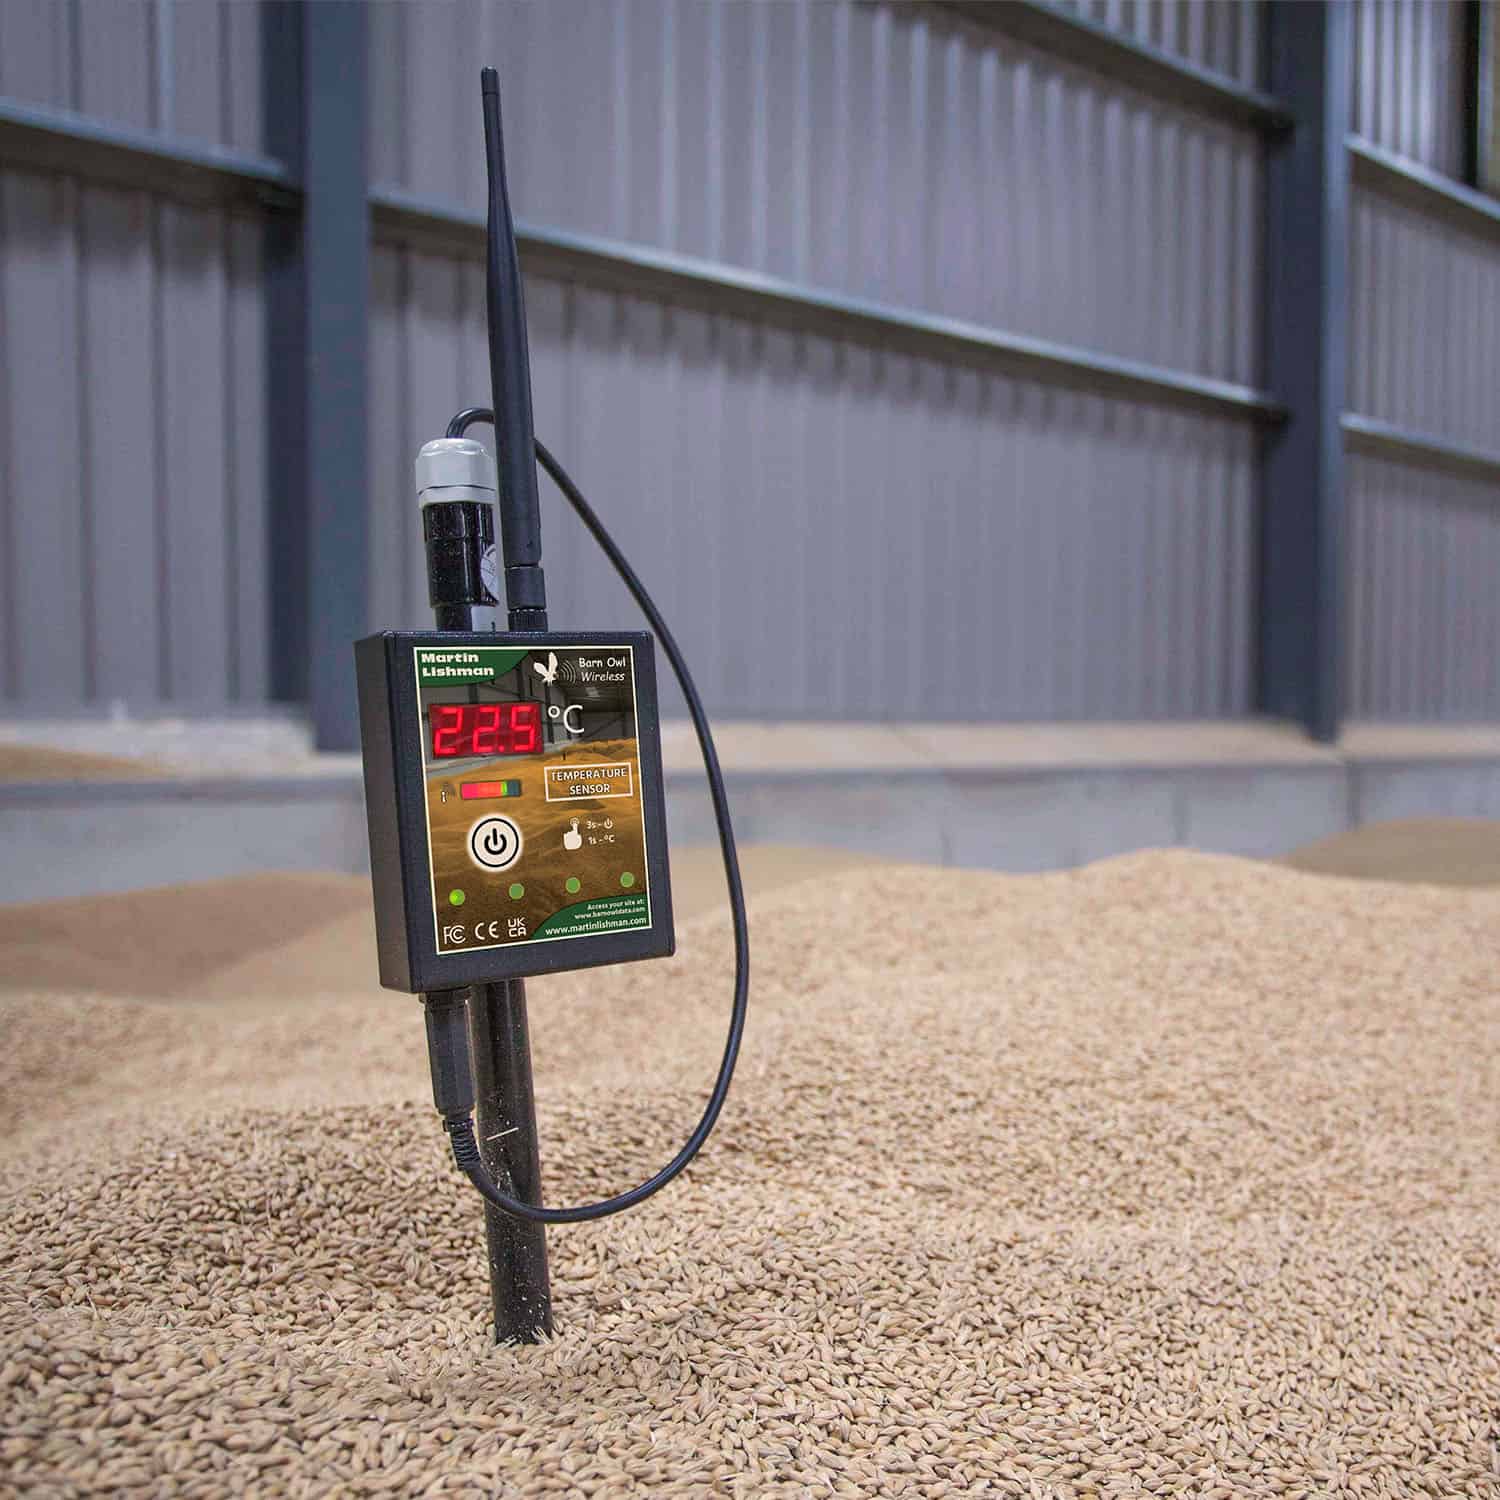 Barn Owl Wireless enables store managers to wirelessly monitor grain temperatures from anywhere in the world.